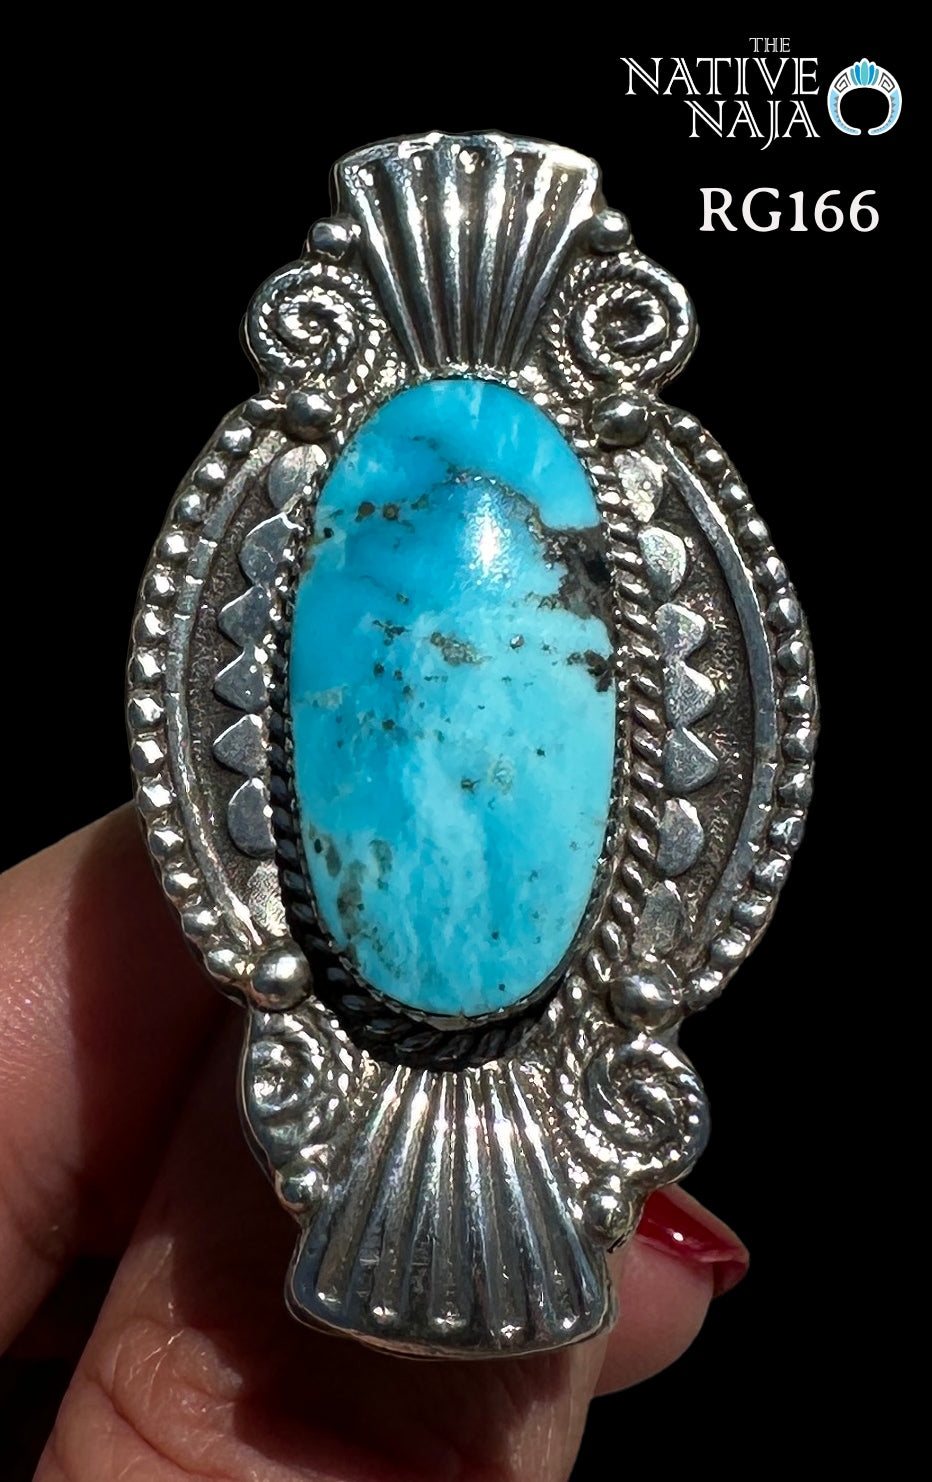 Stunning Navajo Jimison Ben Oval Turquoise & Sterling Silver Ring Size 8 RG166